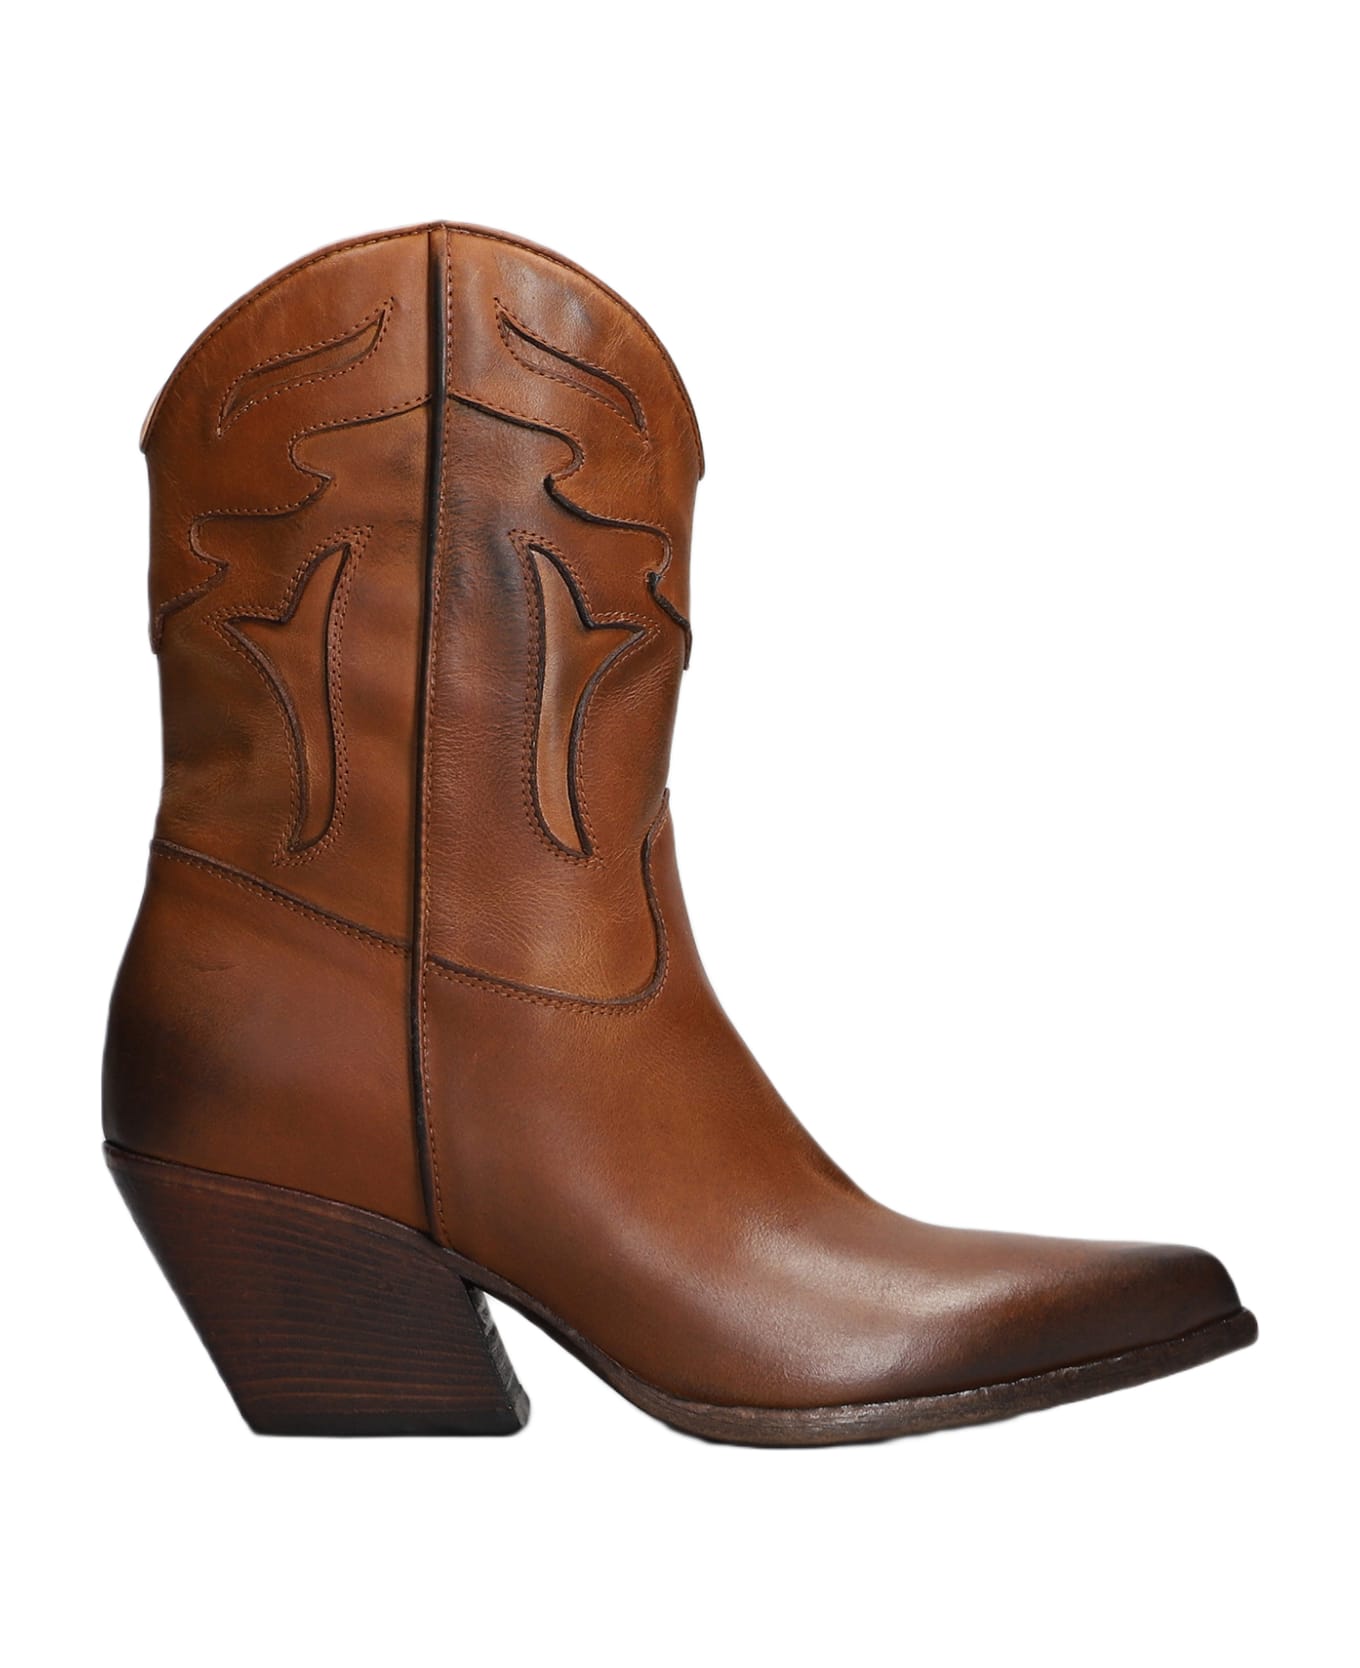 Elena Iachi Texan Ankle Boots In Leather Color Leather - leather color